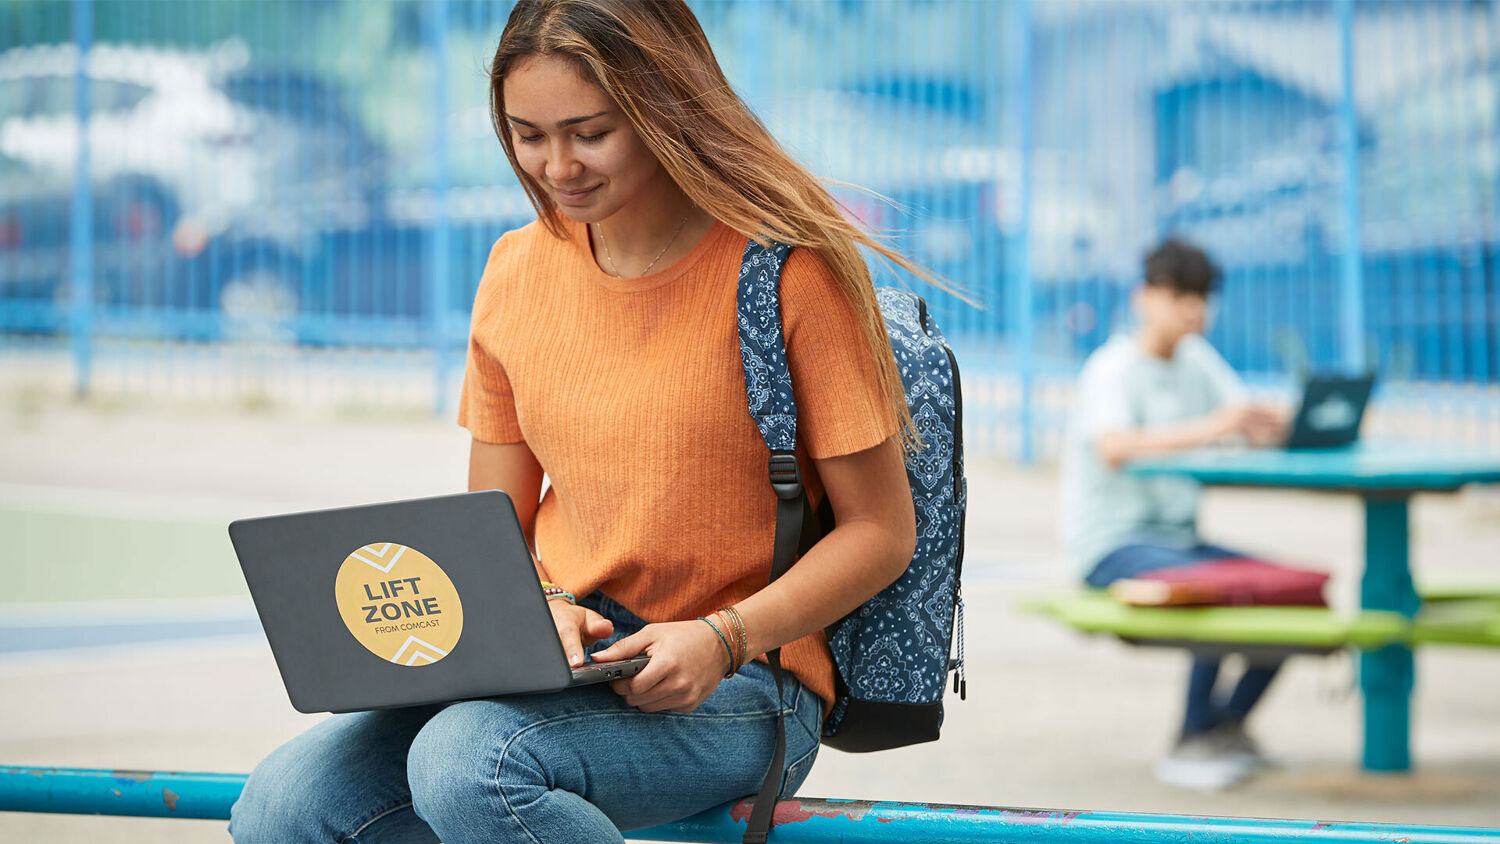 A young woman types on a laptop outdoors.